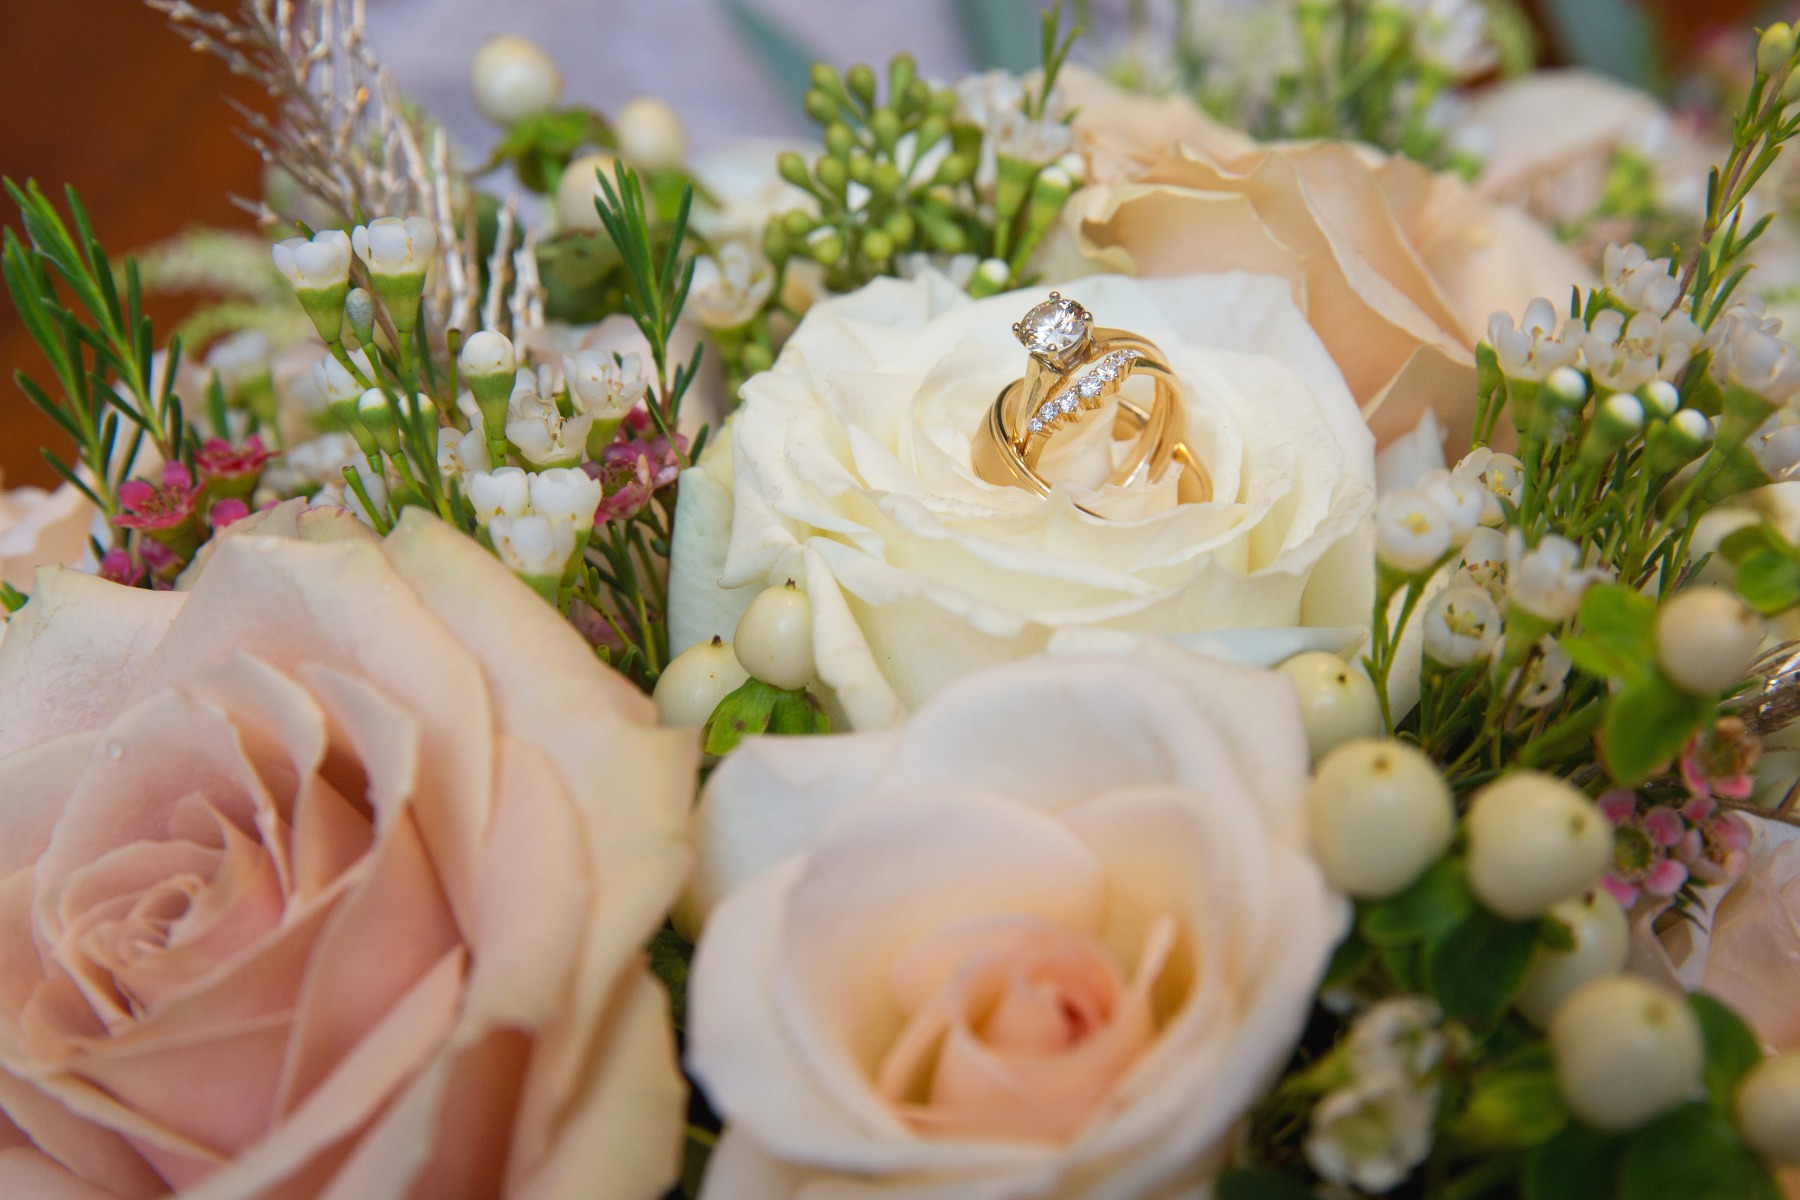 wedding rings sit inside a bouquet of white and peach roses